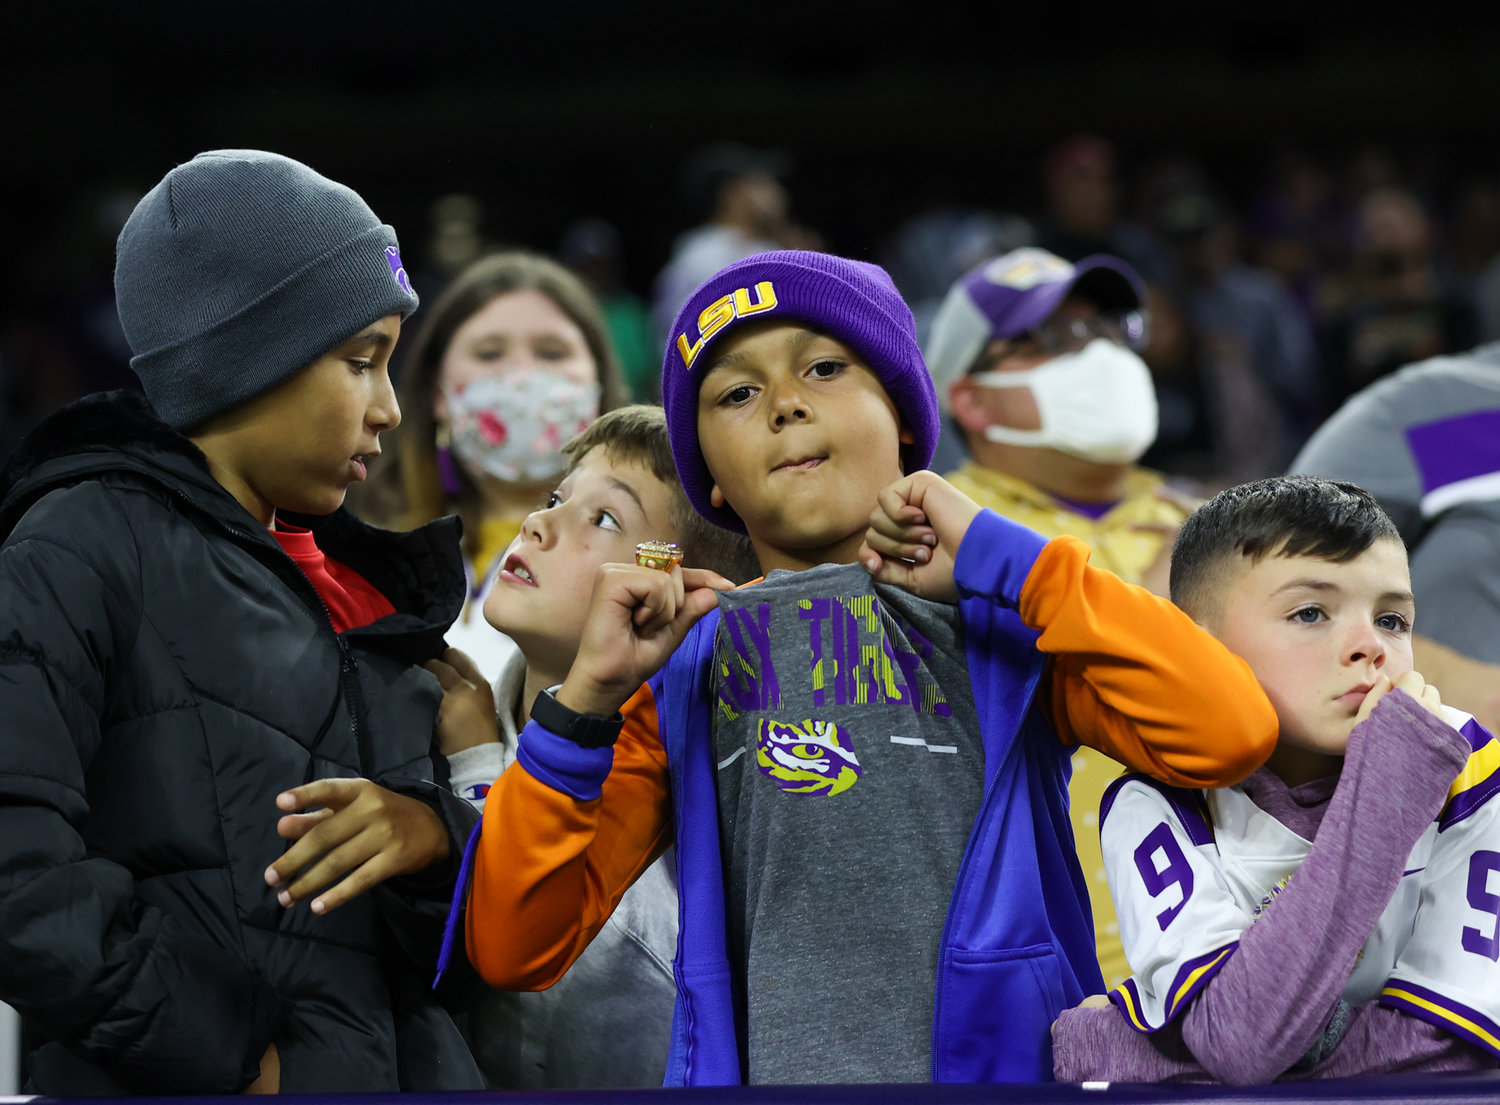 A group of young LSU Tigers fans during the TaxAct Texas Bowl on Jan. 4, 2022 in Houston, Texas.